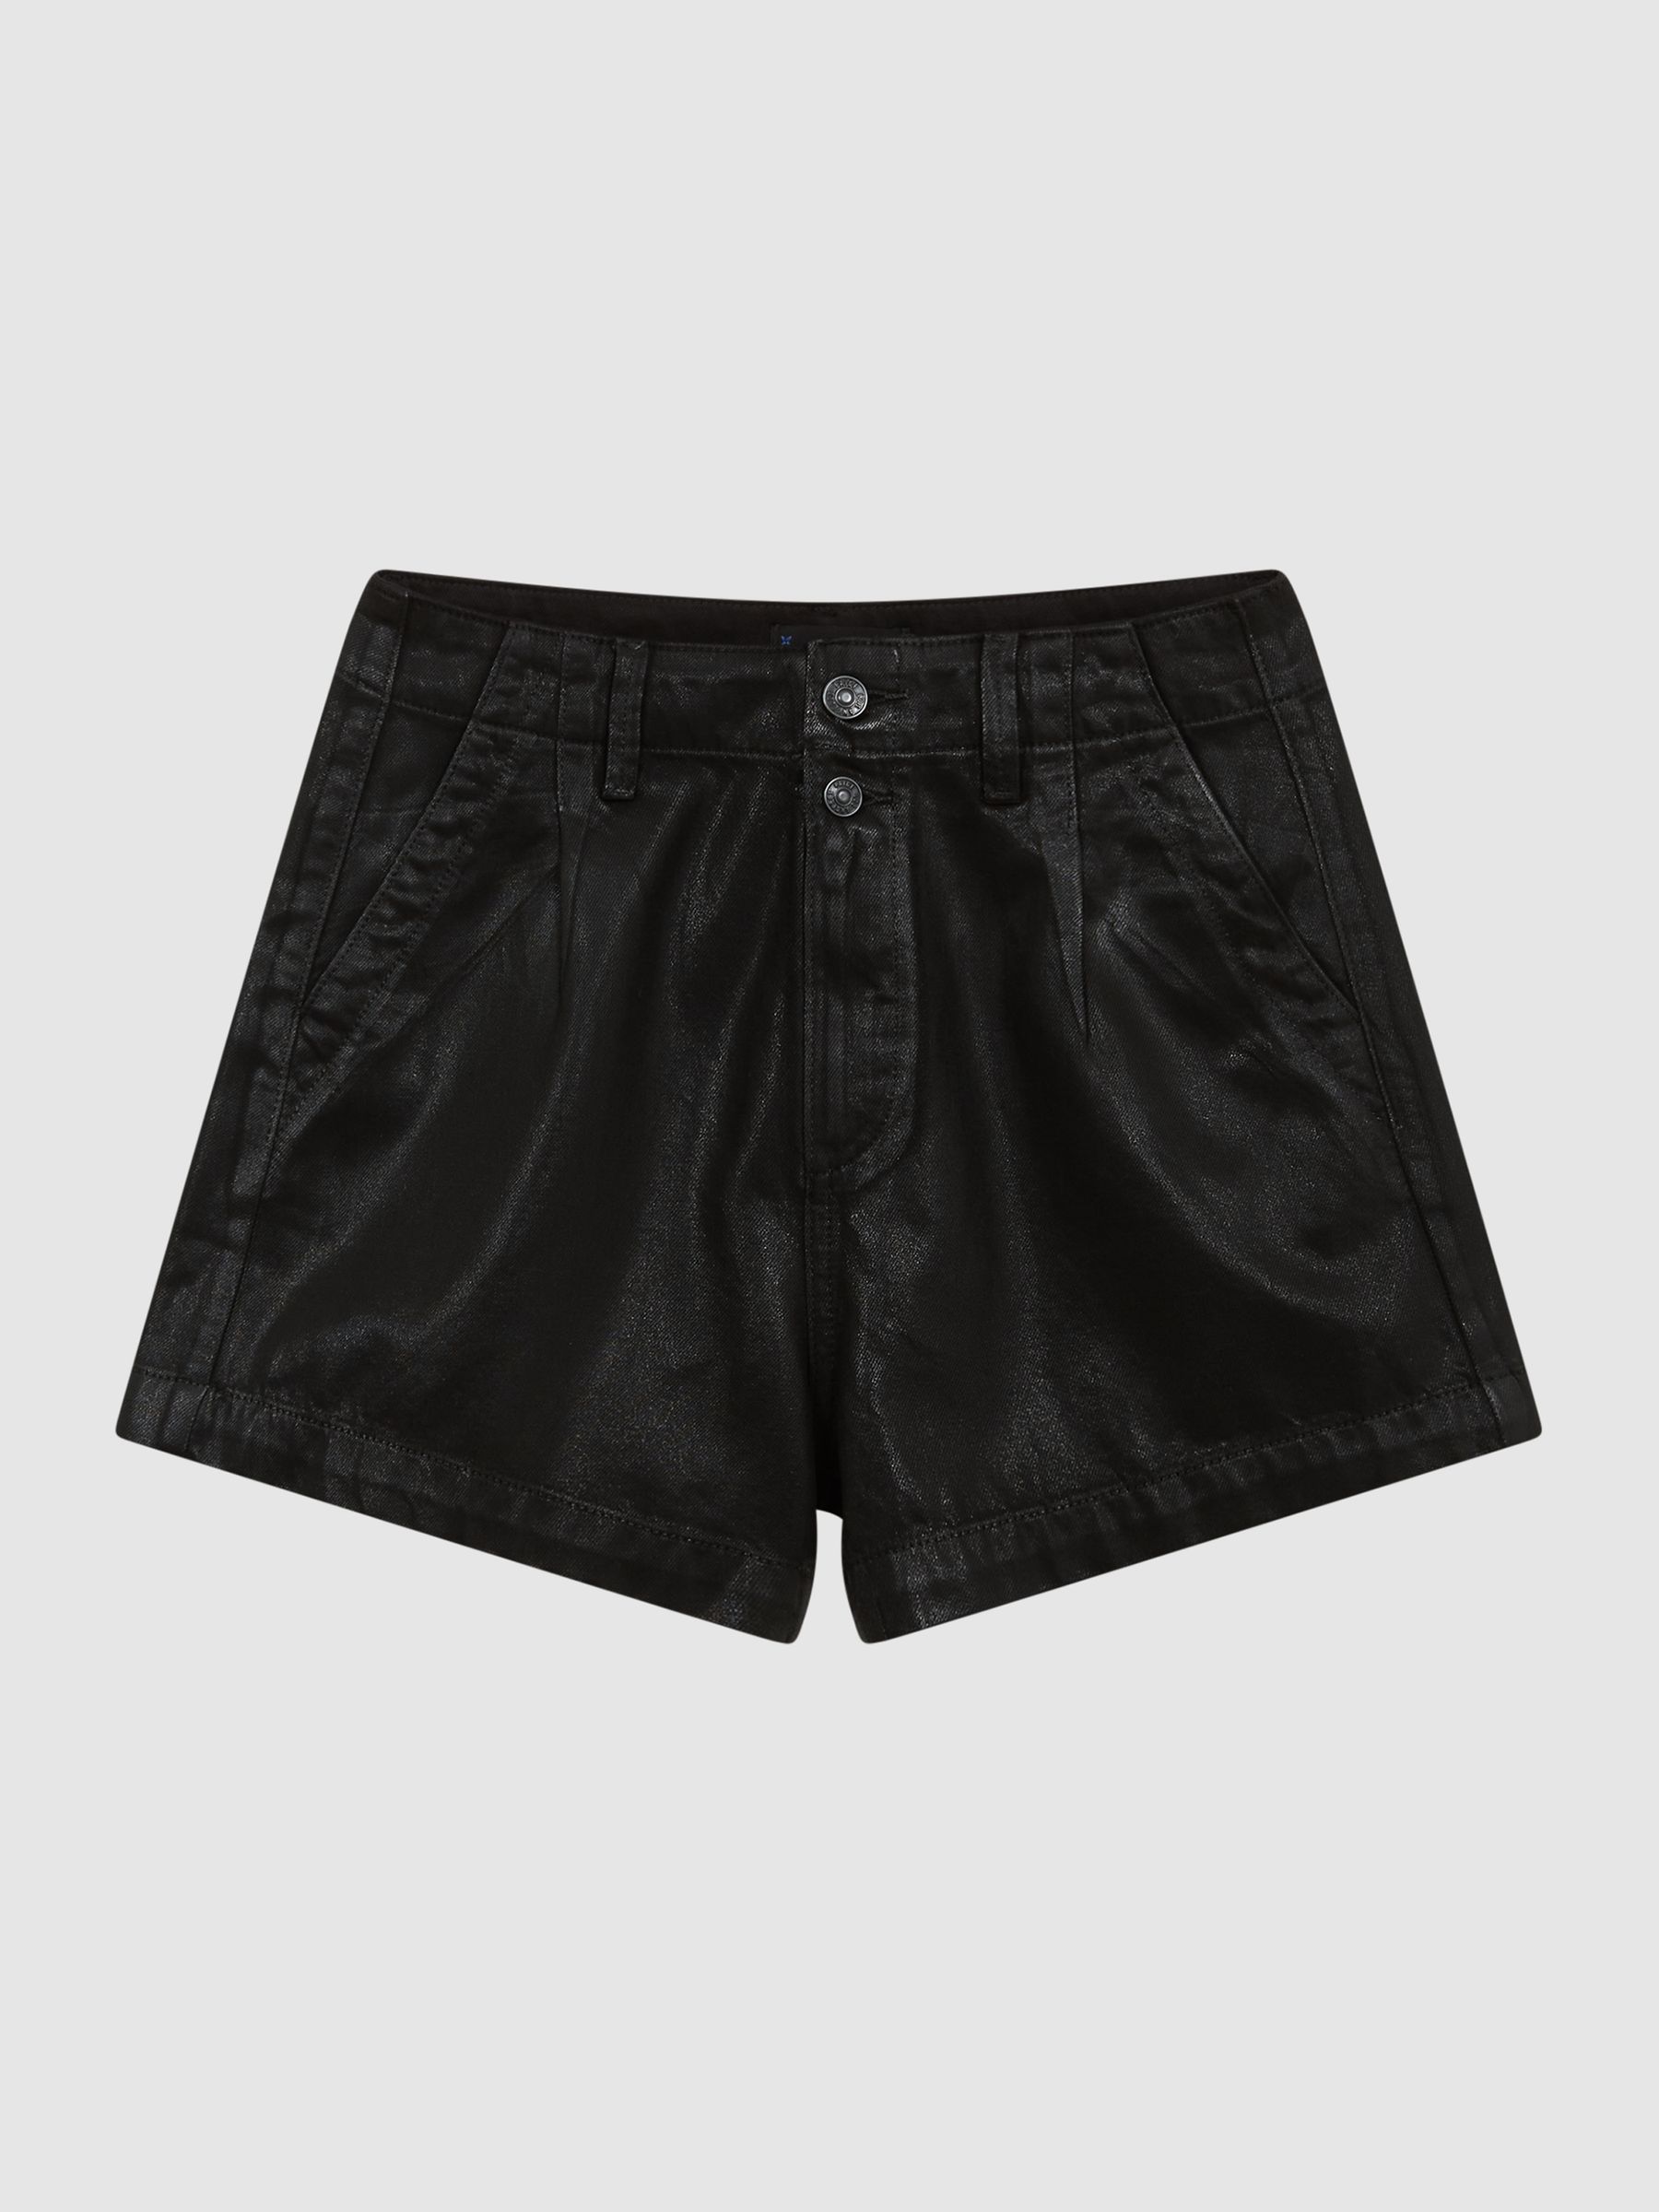 Reiss Mayslie PAIGE Button Up Denim Coated Shorts - REISS